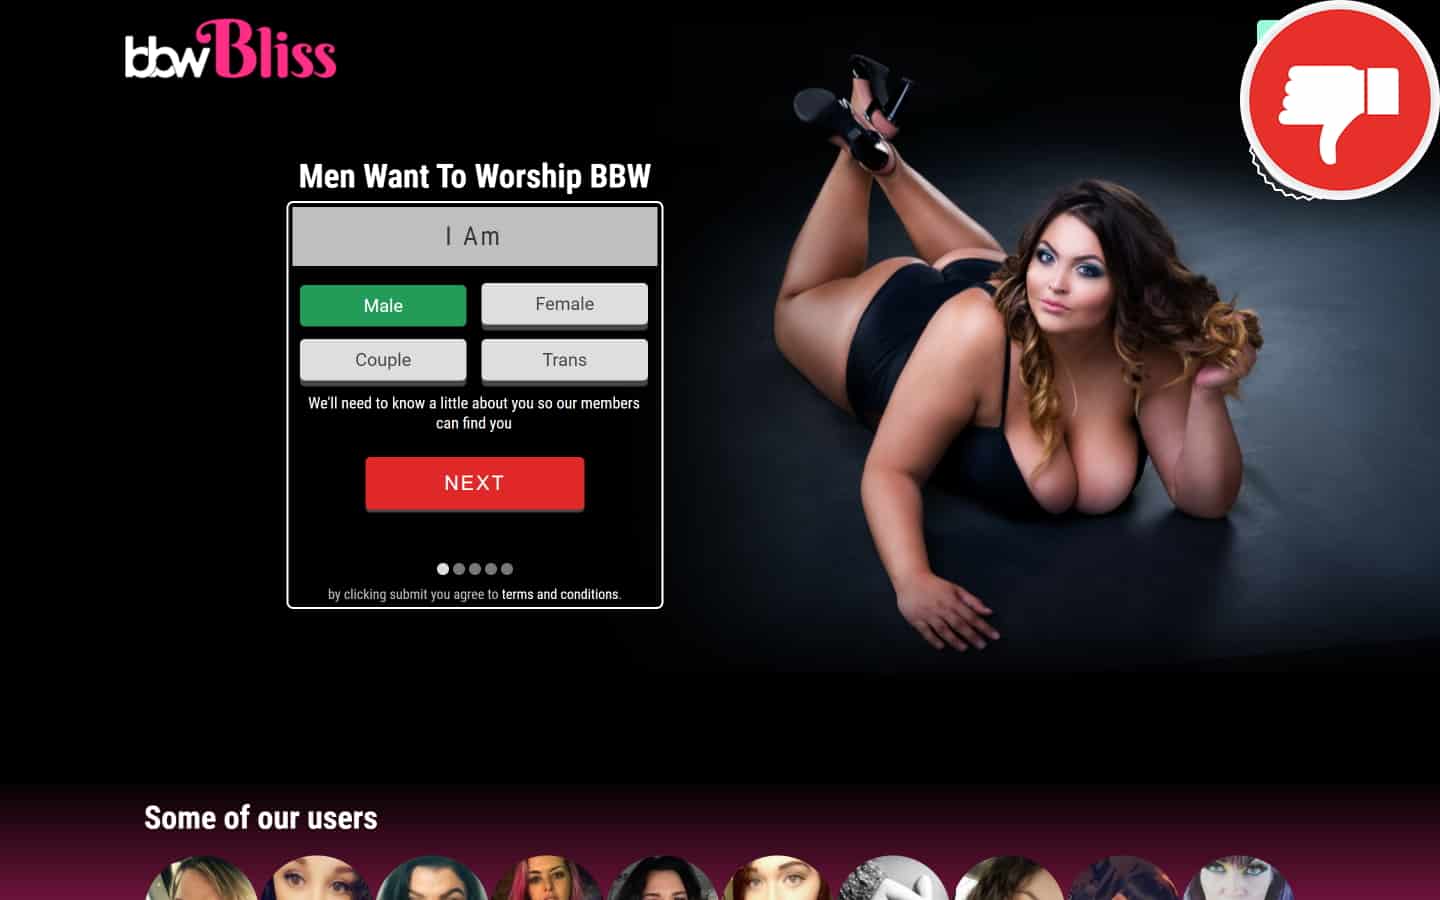 Review BBW-Bliss.com scam experience